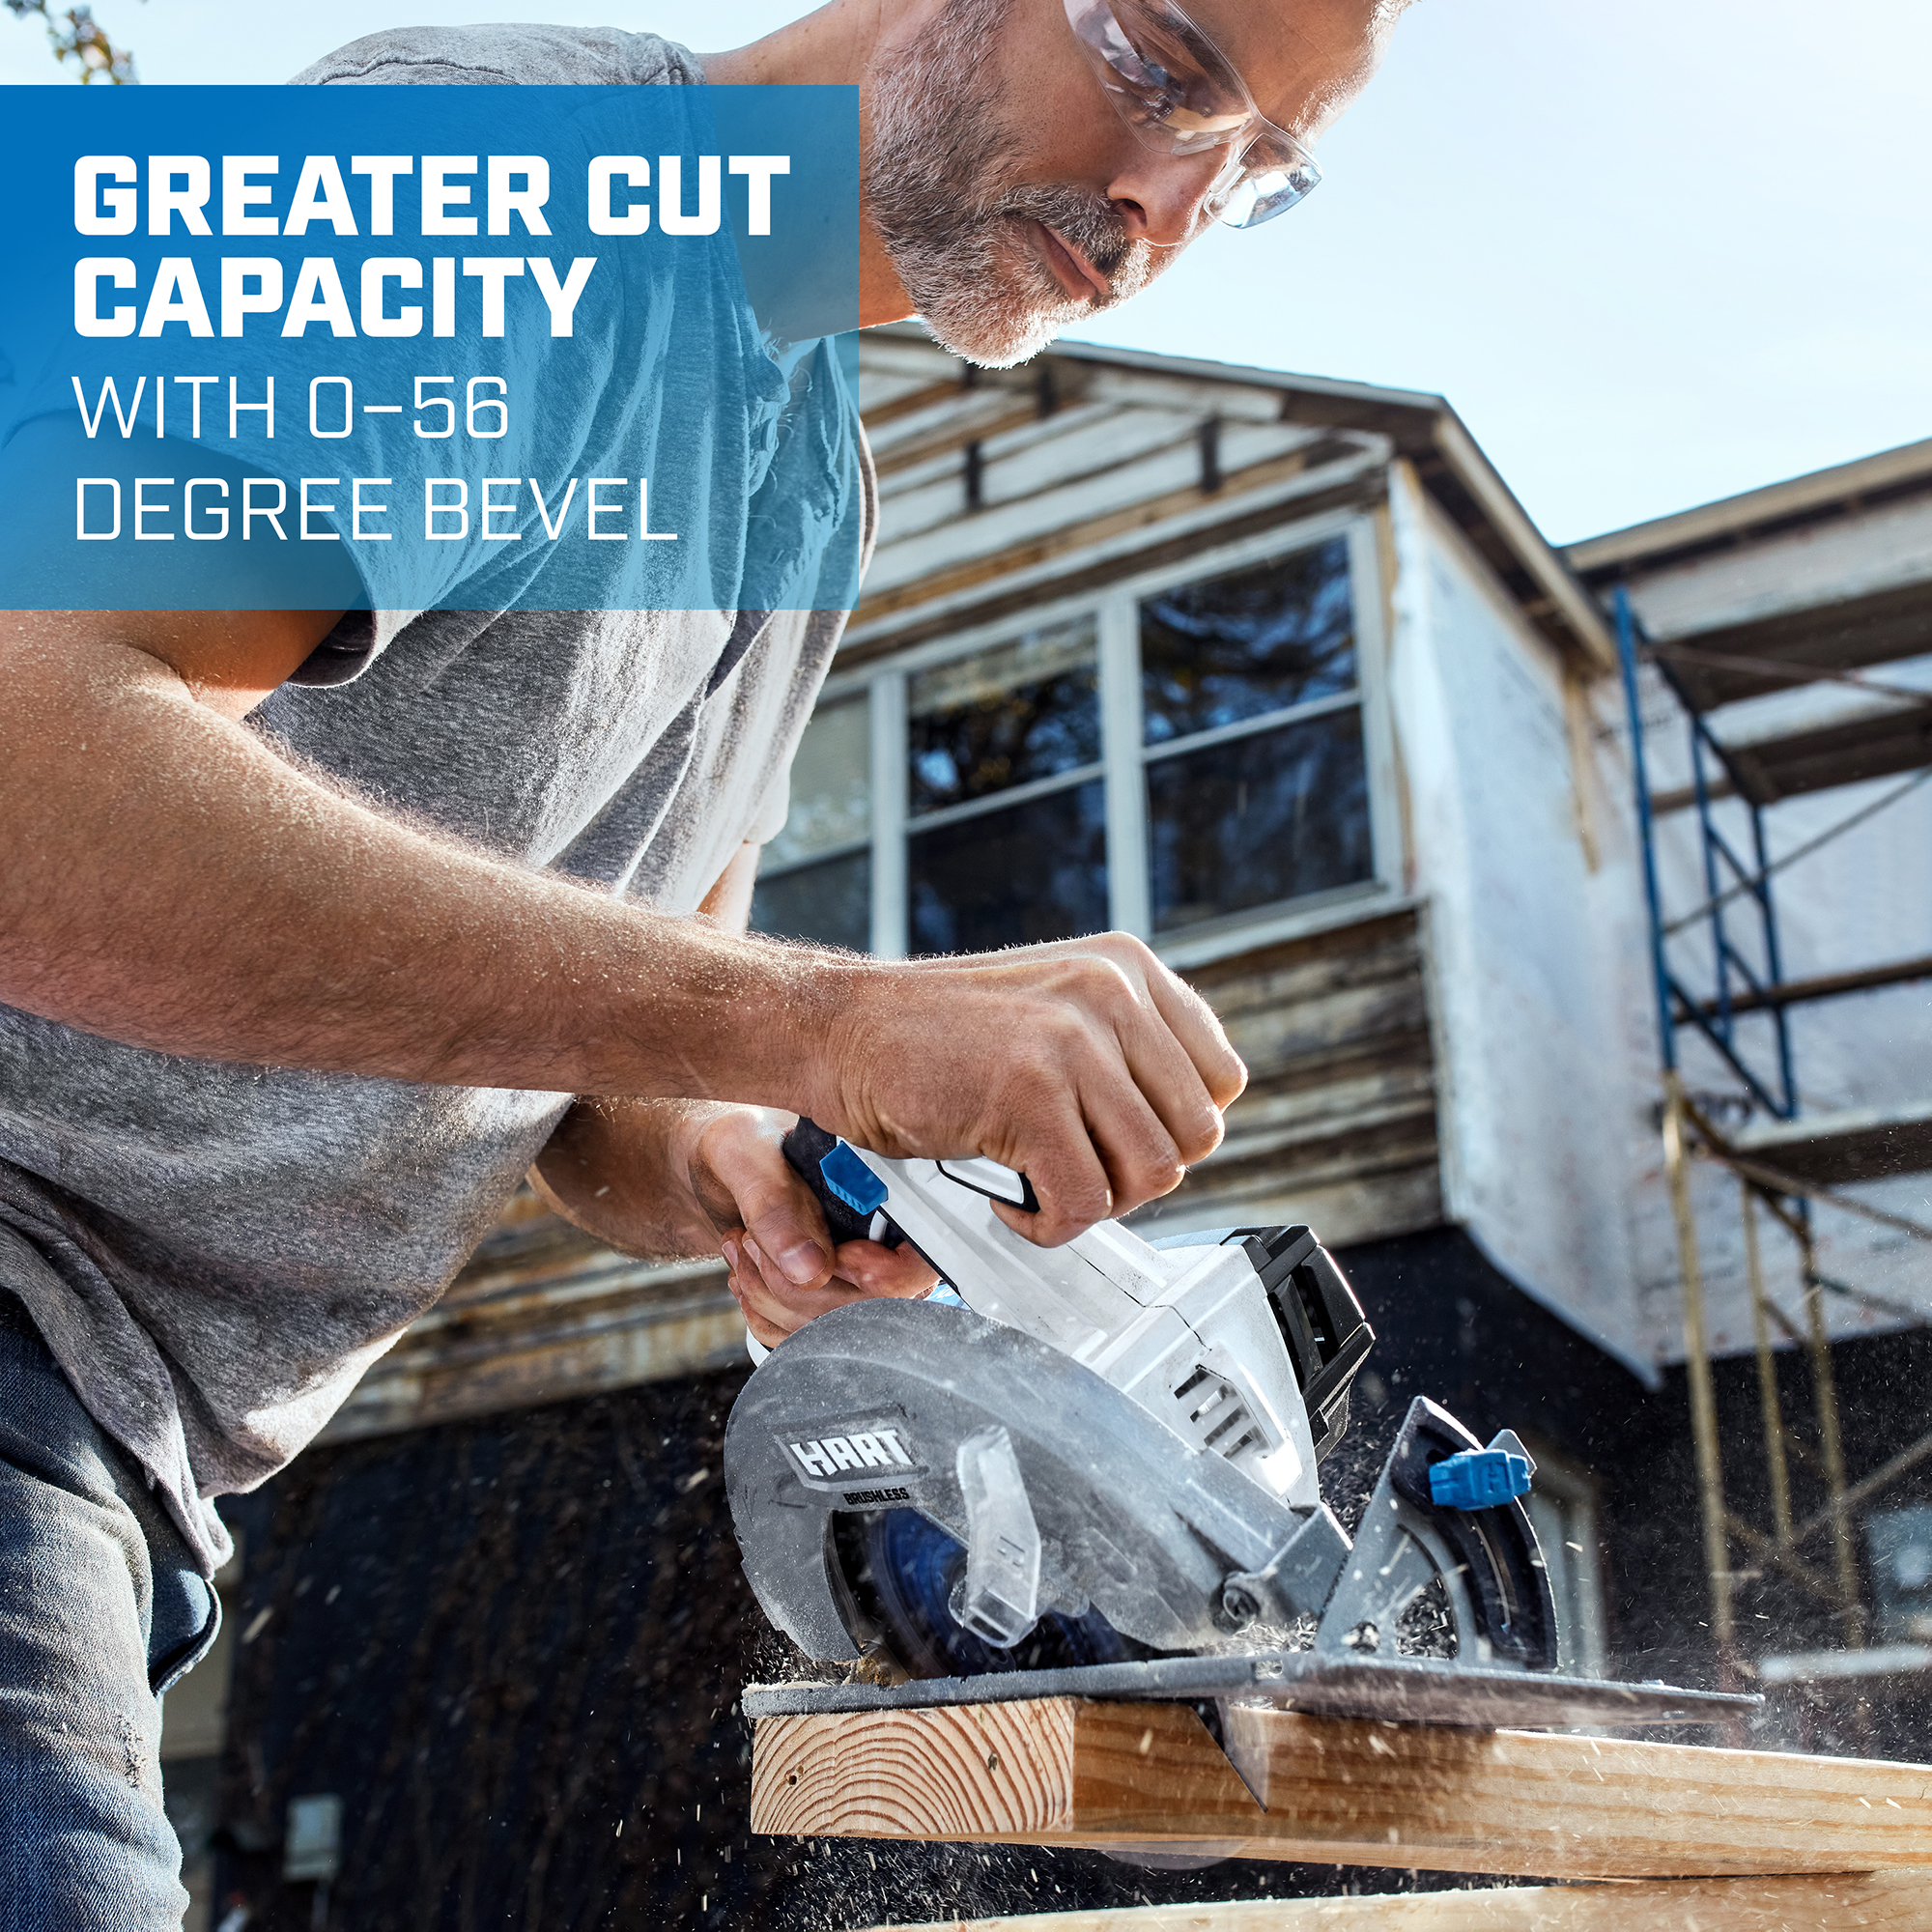 greater cut capacity with 0-56 degree bevel